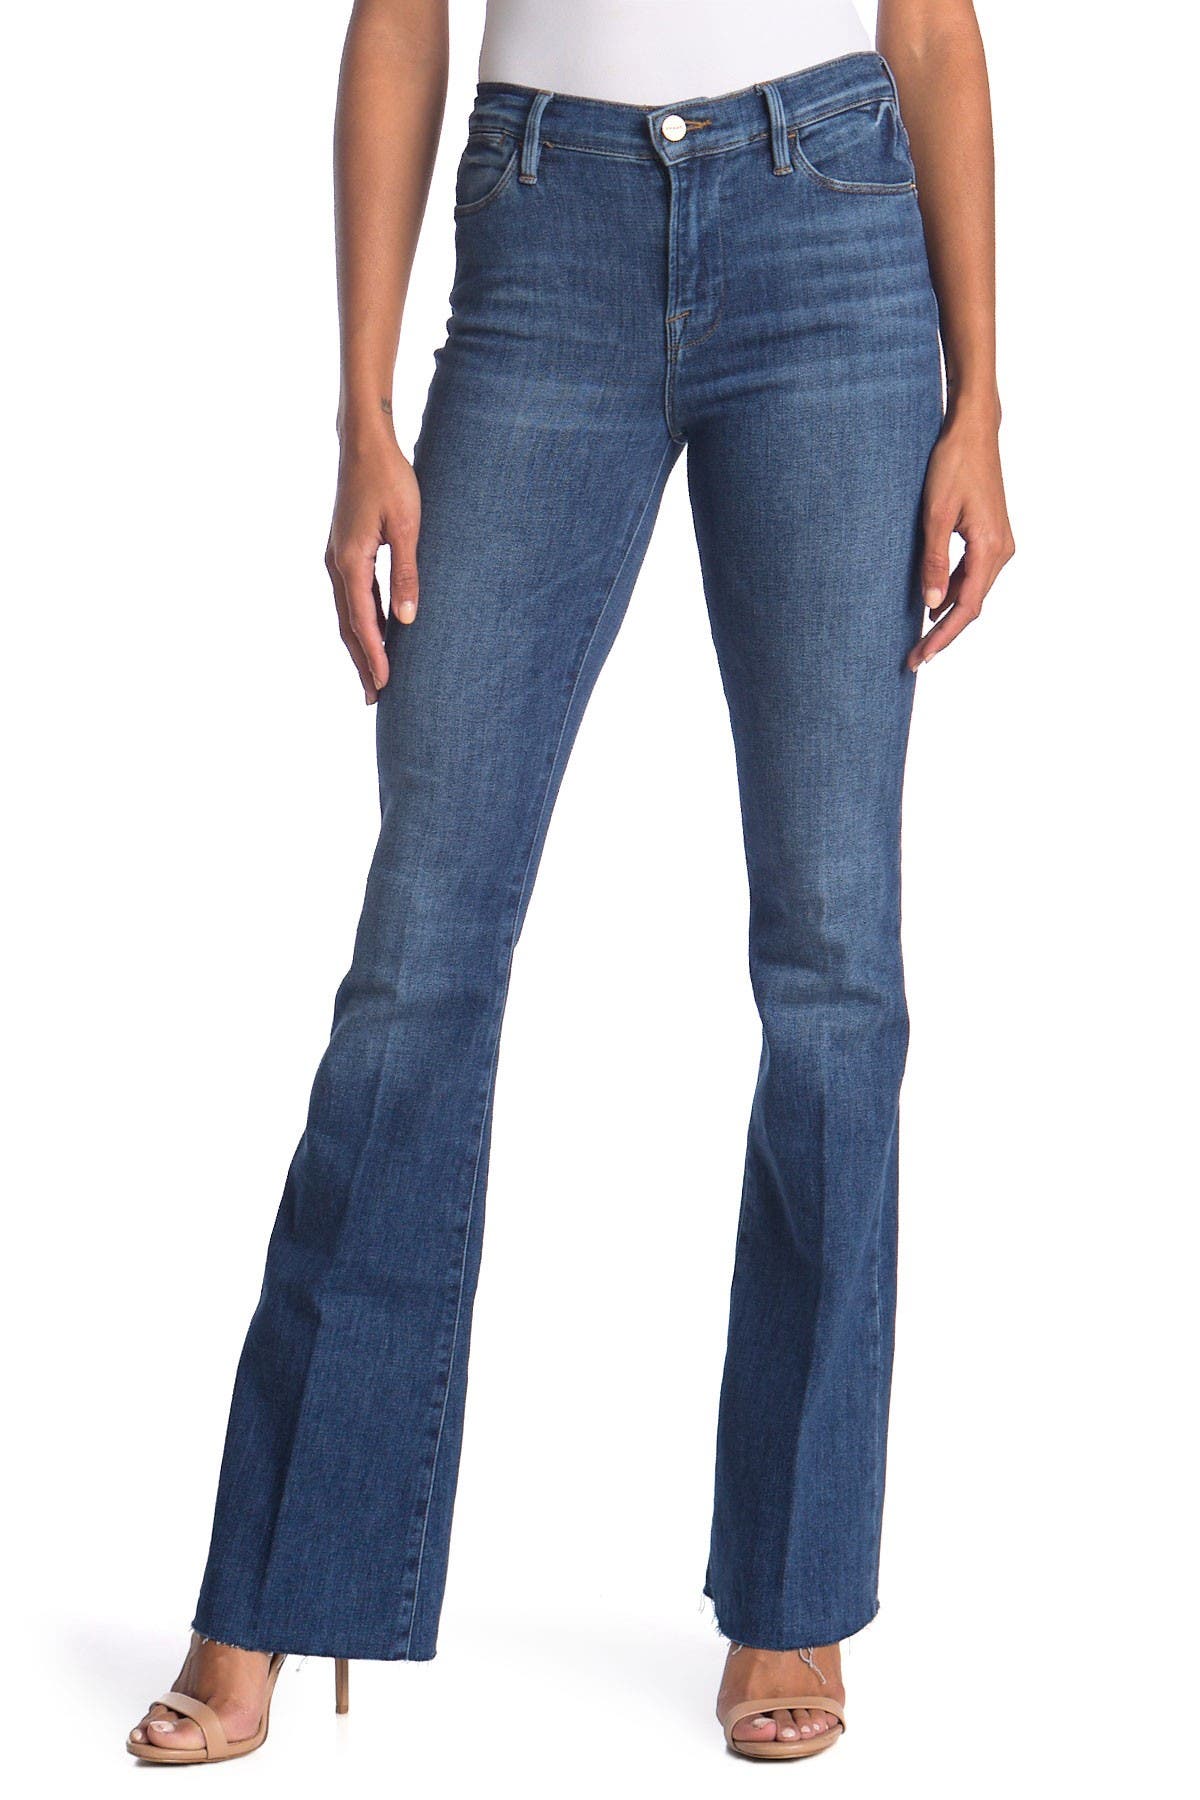 nordstrom bootcut jeans